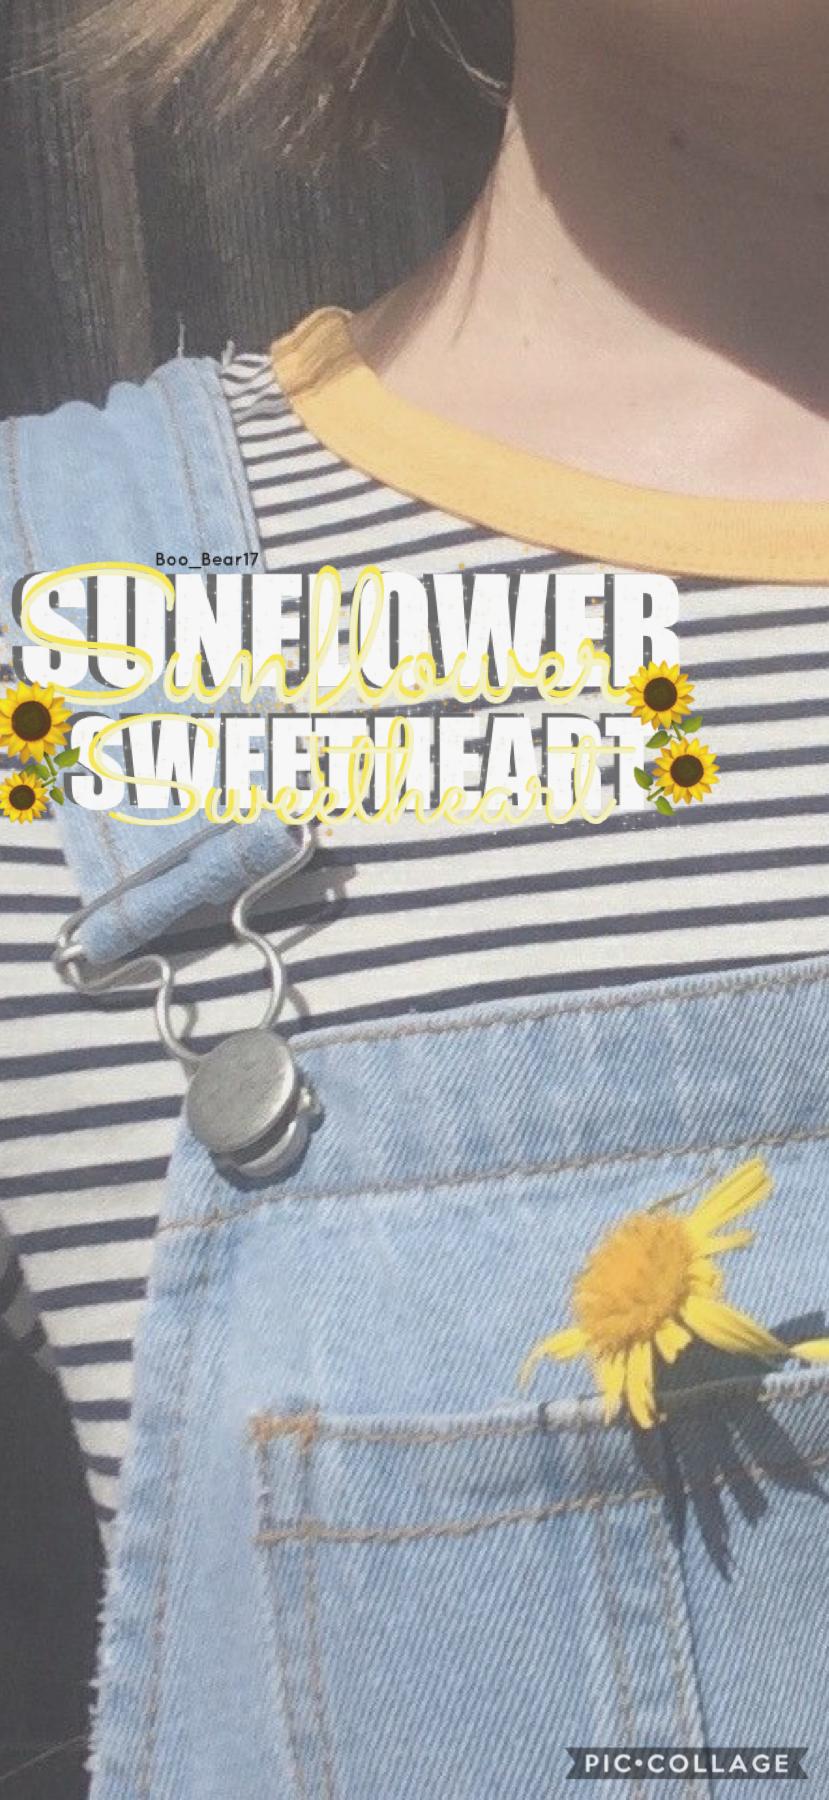 🌻sunflower sweetheart🌻
•sorry I haven’t been responding to many rps, haven’t been in the best mental state lately 
•song rec: Passion For Publication by Anarbor